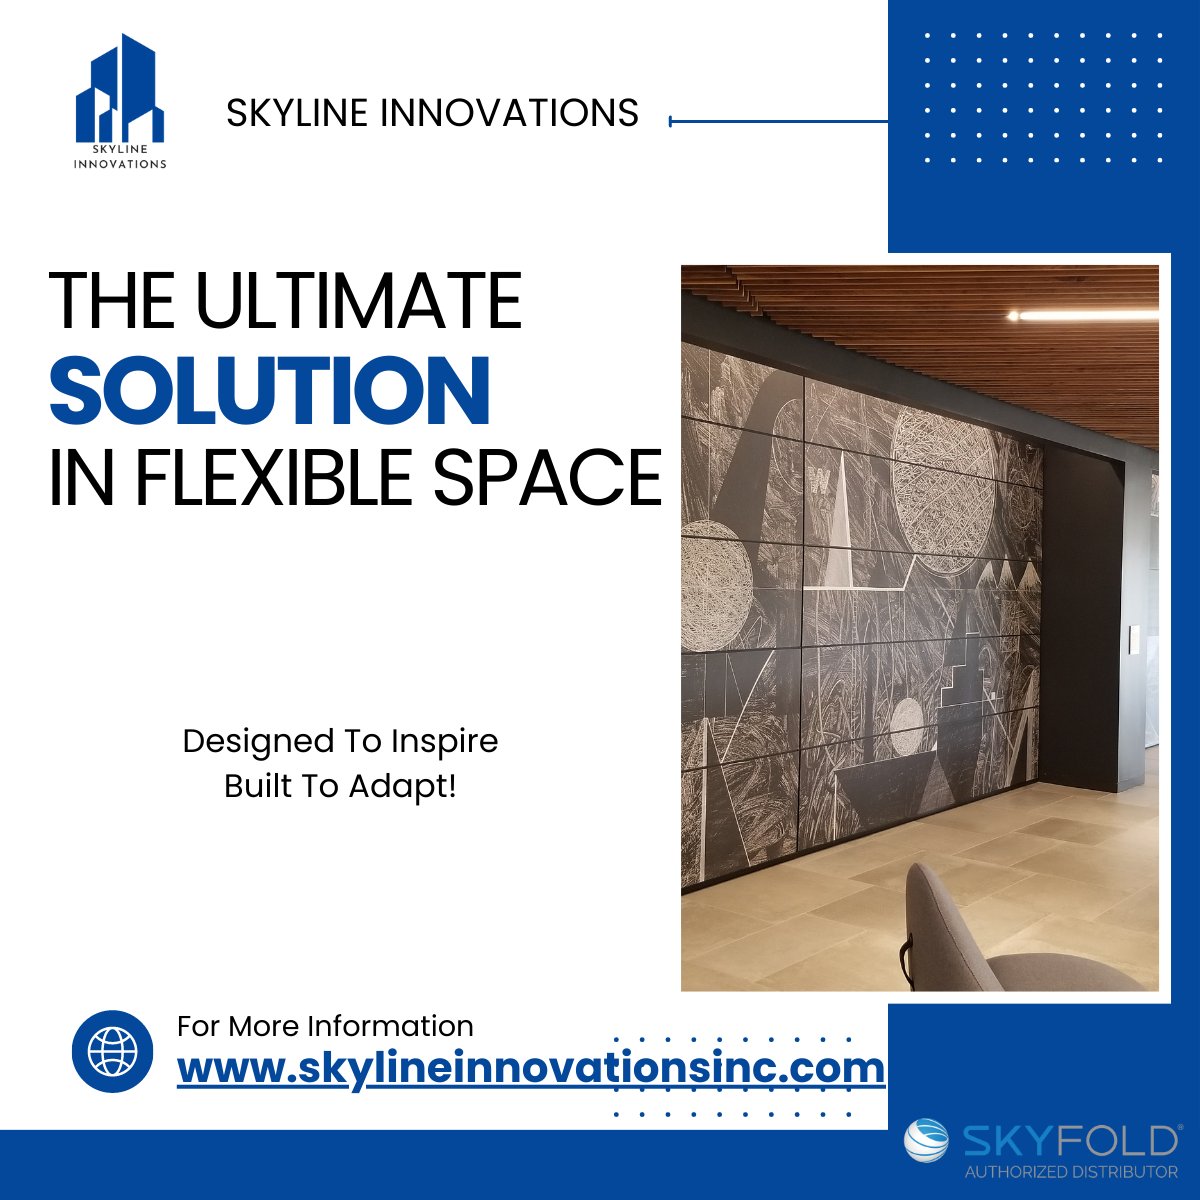 Seeking inspired design while also needing a flexible space? With Skyfold, you can truly have it all! skylineinnovationsinc.com #innovation #design #education #hotelsandmotels #collegesanduniversities #architecture